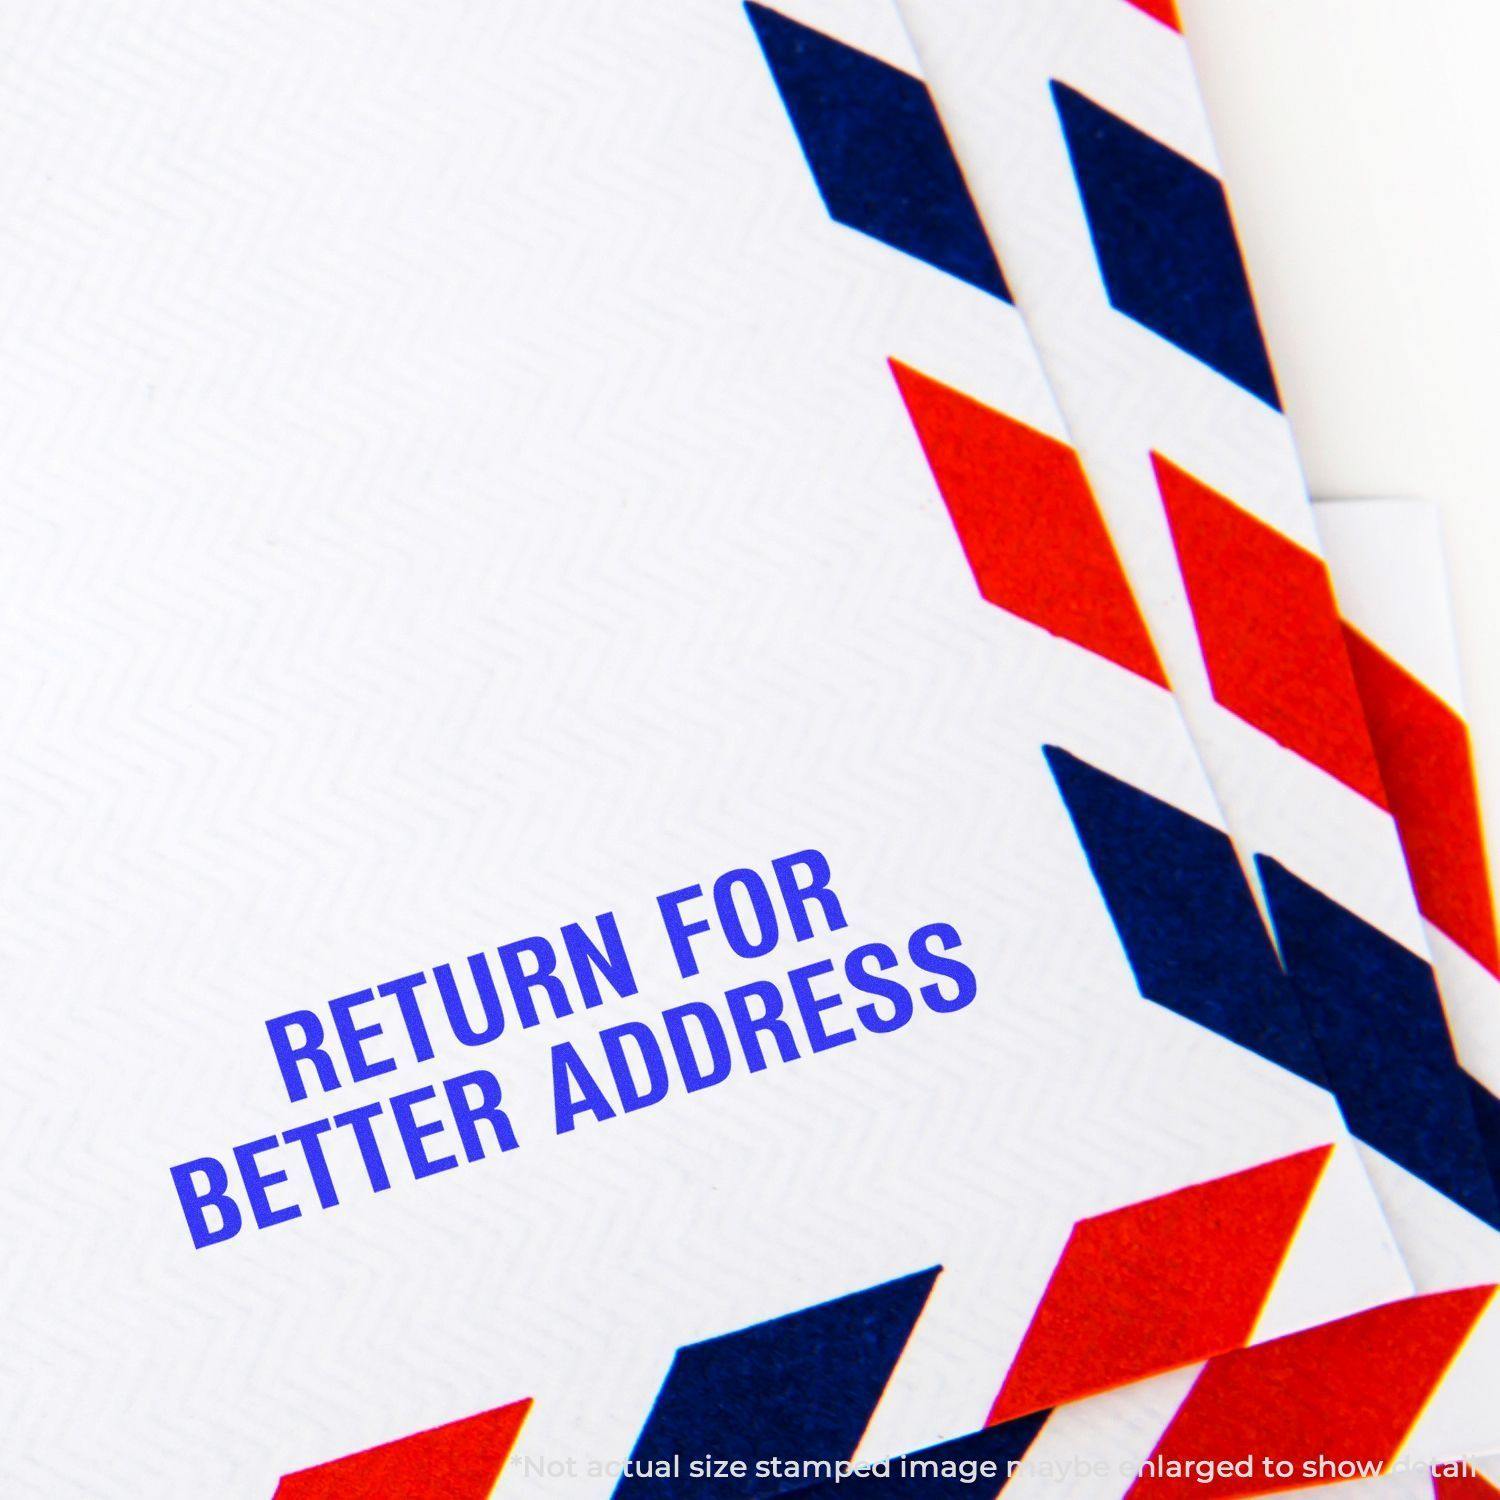 A stock office rubber stamp with a stamped image showing how the text "RETURN FOR BETTER ADDRESS" in a large font is displayed after stamping.